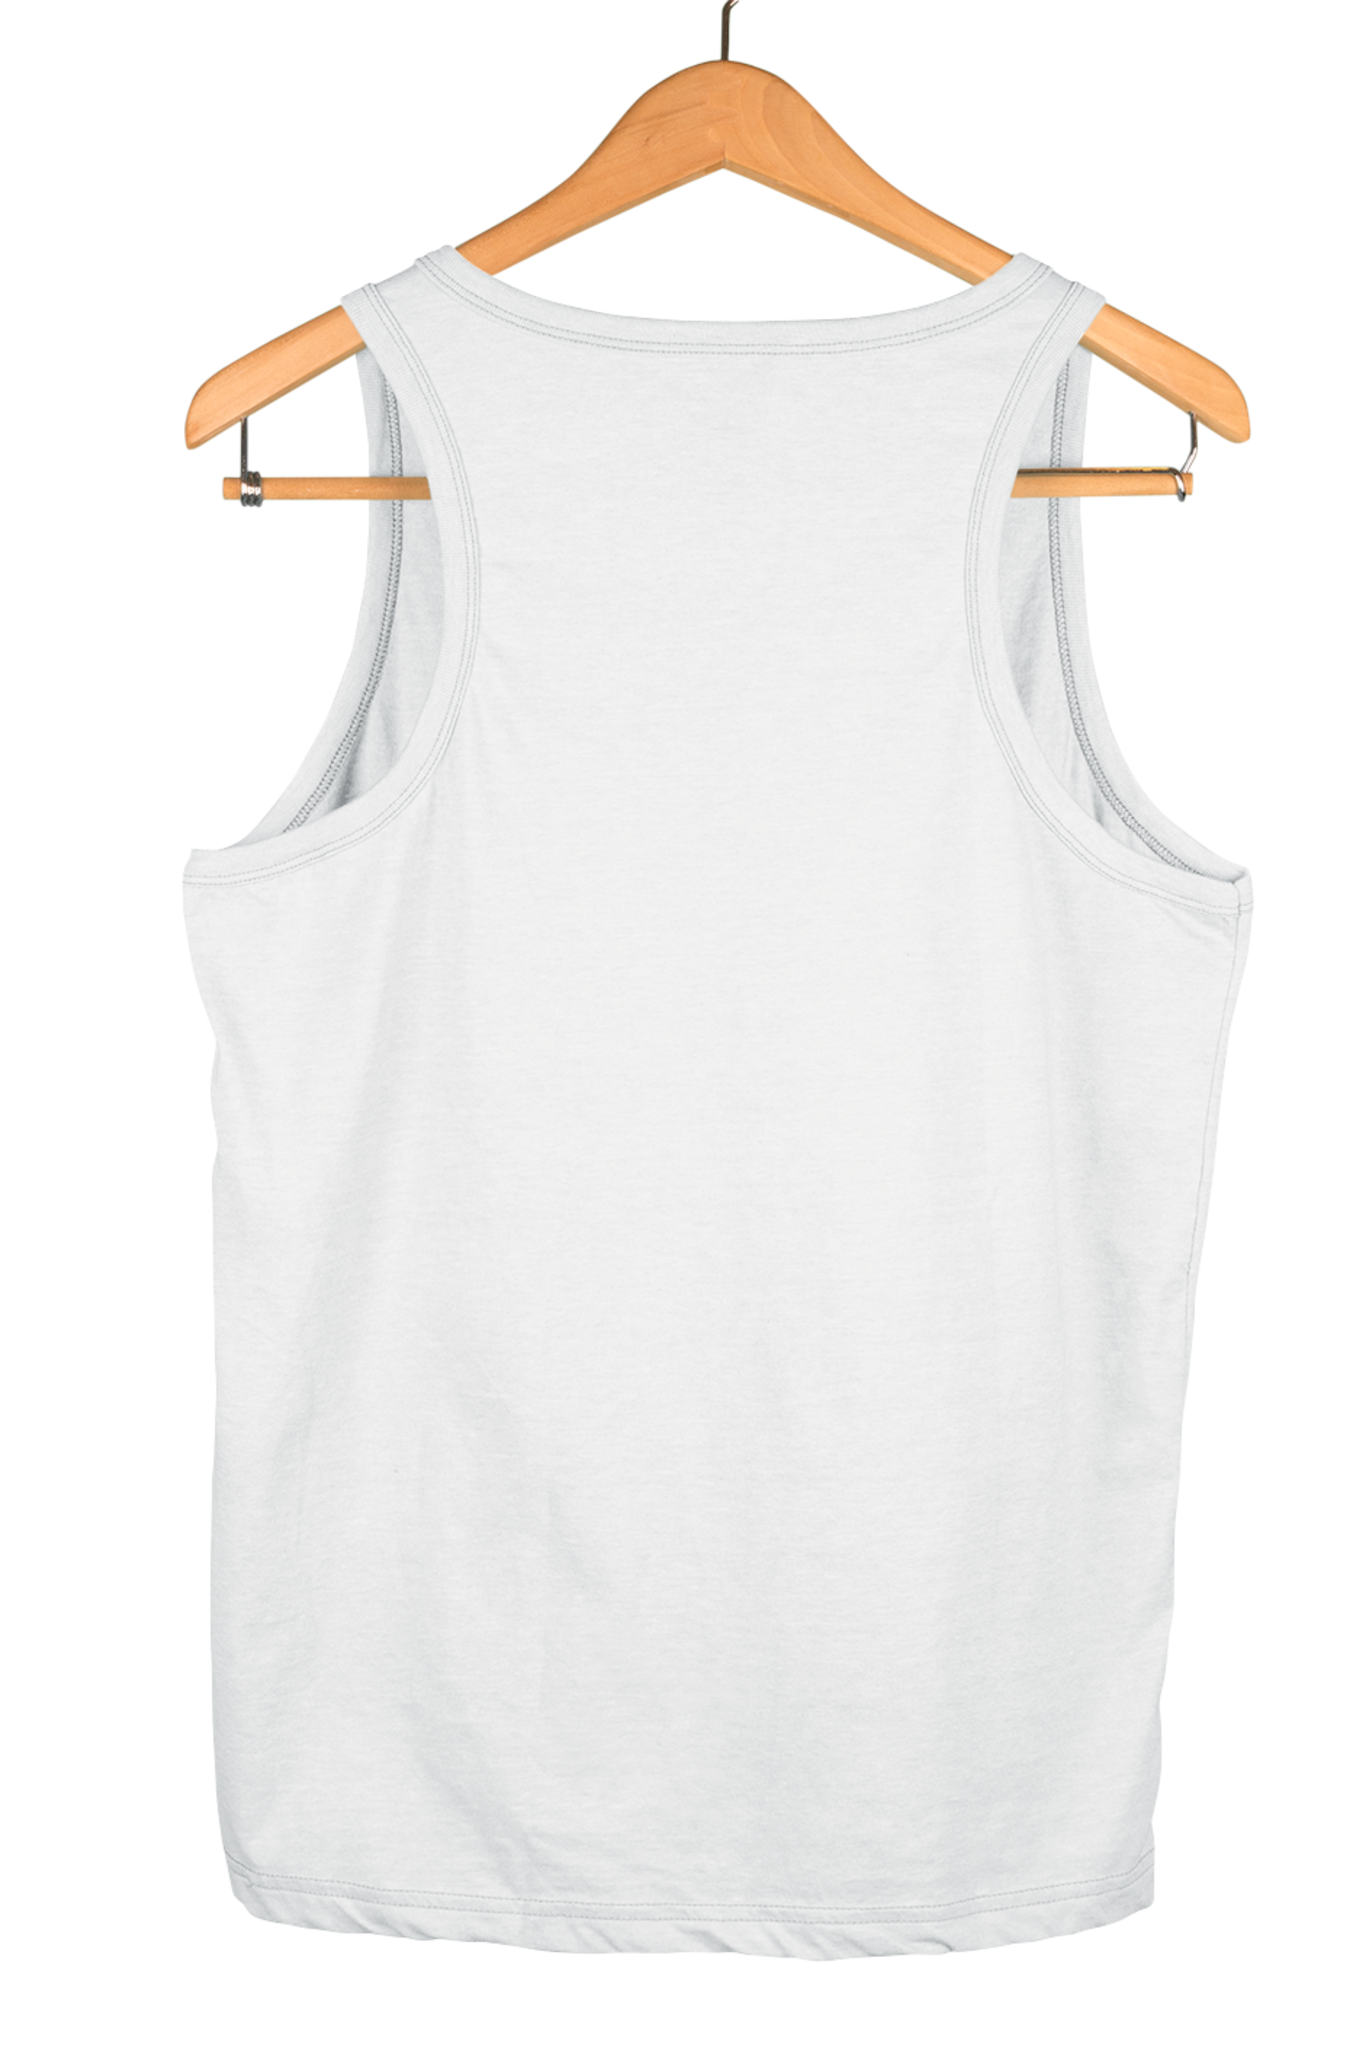 Women's Tank Top: Unstoppable